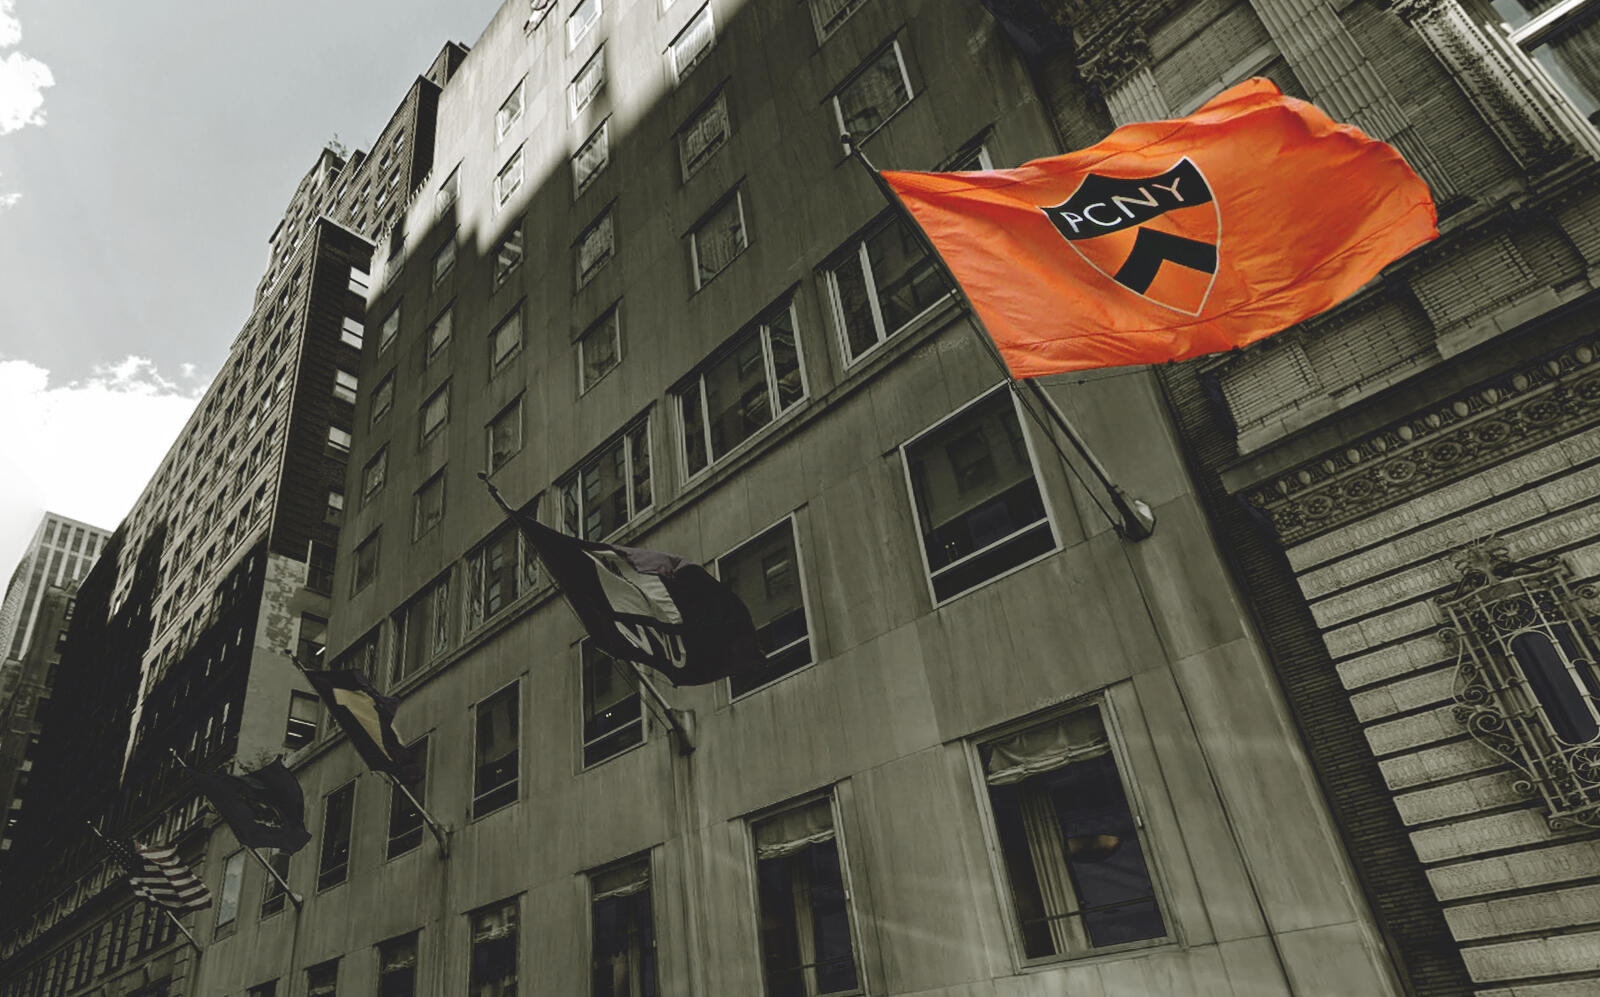 The Princeton Club flag in front of 15 West 43rd Street (Google Maps)